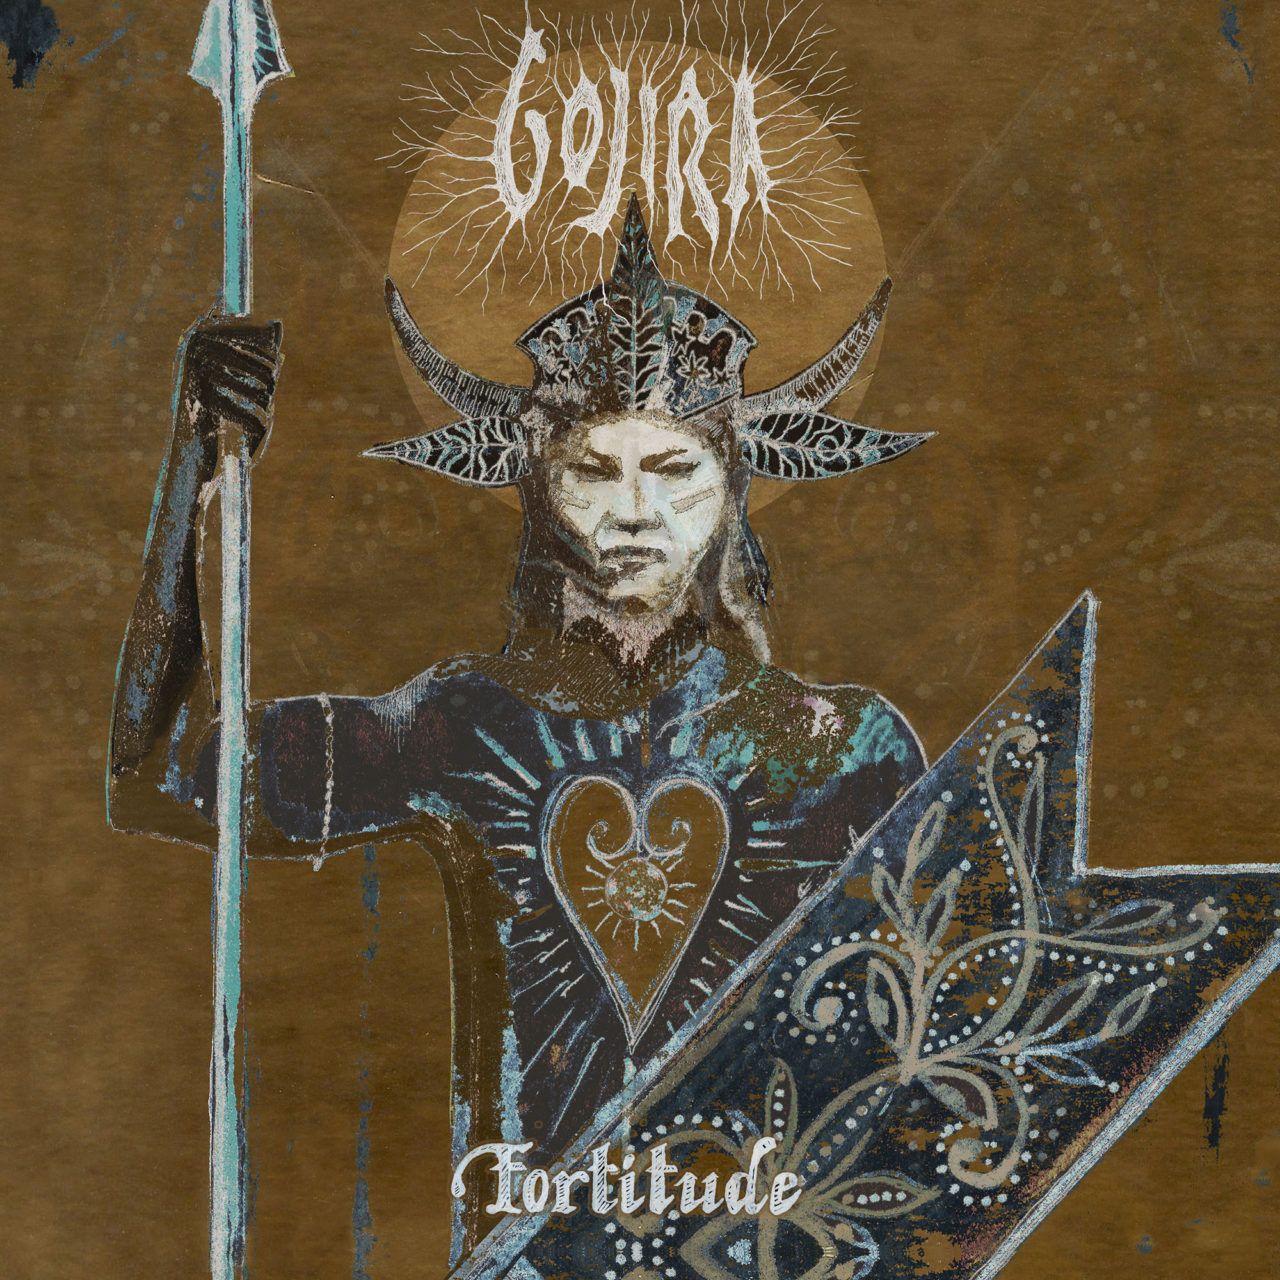 ‘Fortitude’ is a turning point for French metal quartet Gojira